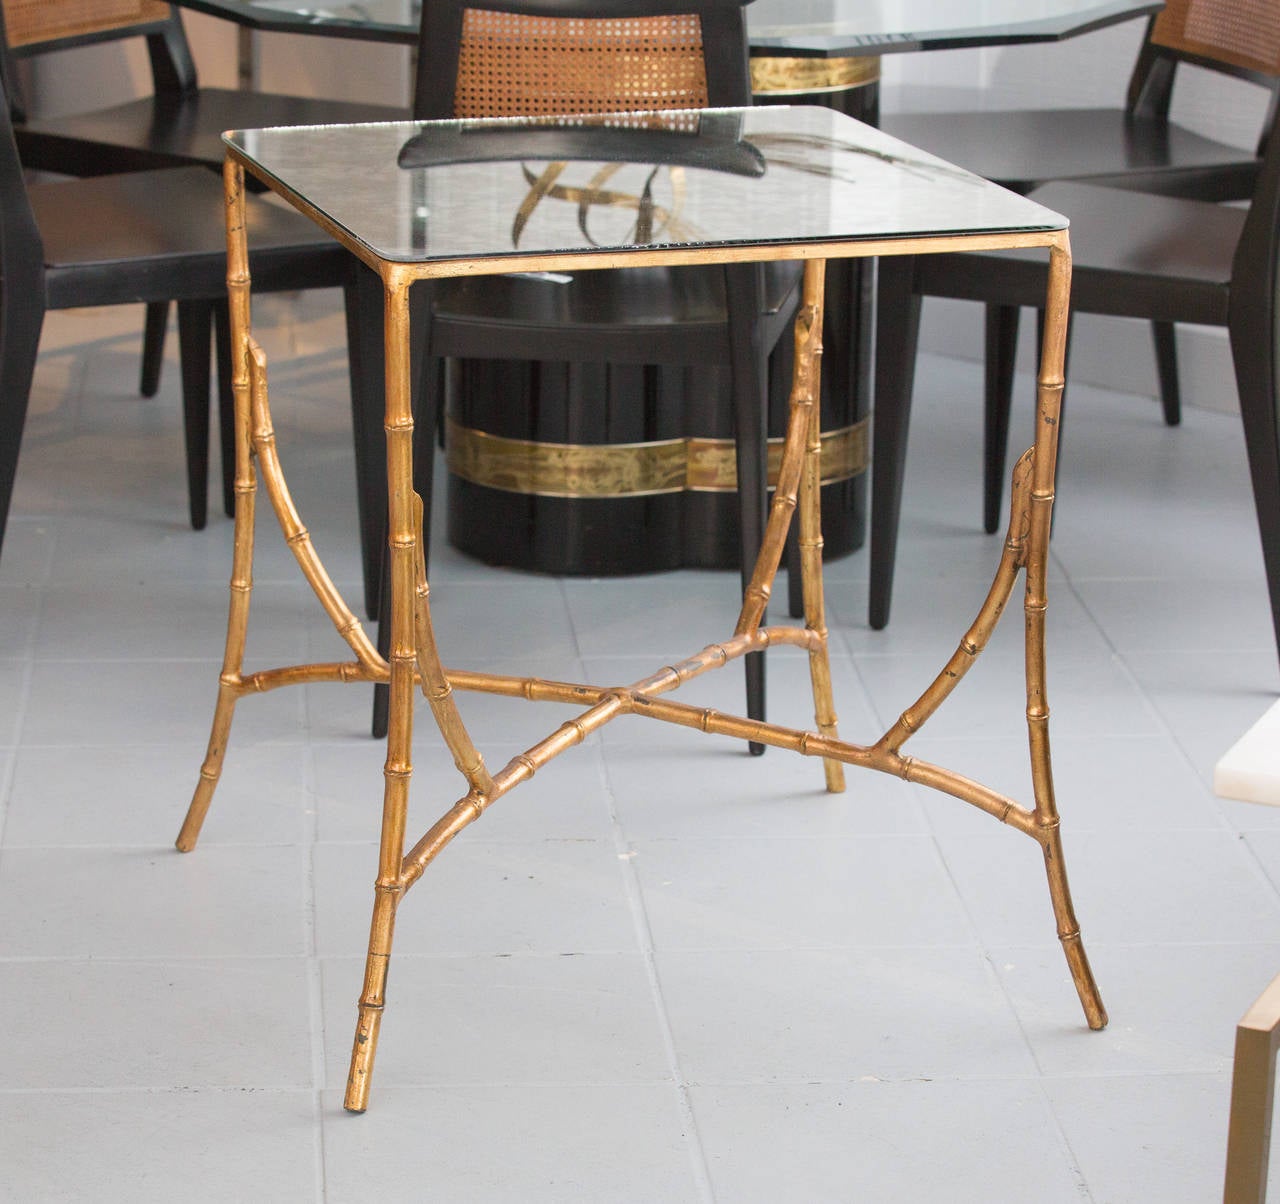 Two Side Tables in a Maison Jansen Style with faux bamboo bases
and antiqued bronze mirror tops.
The tables are not a pair, each different size.